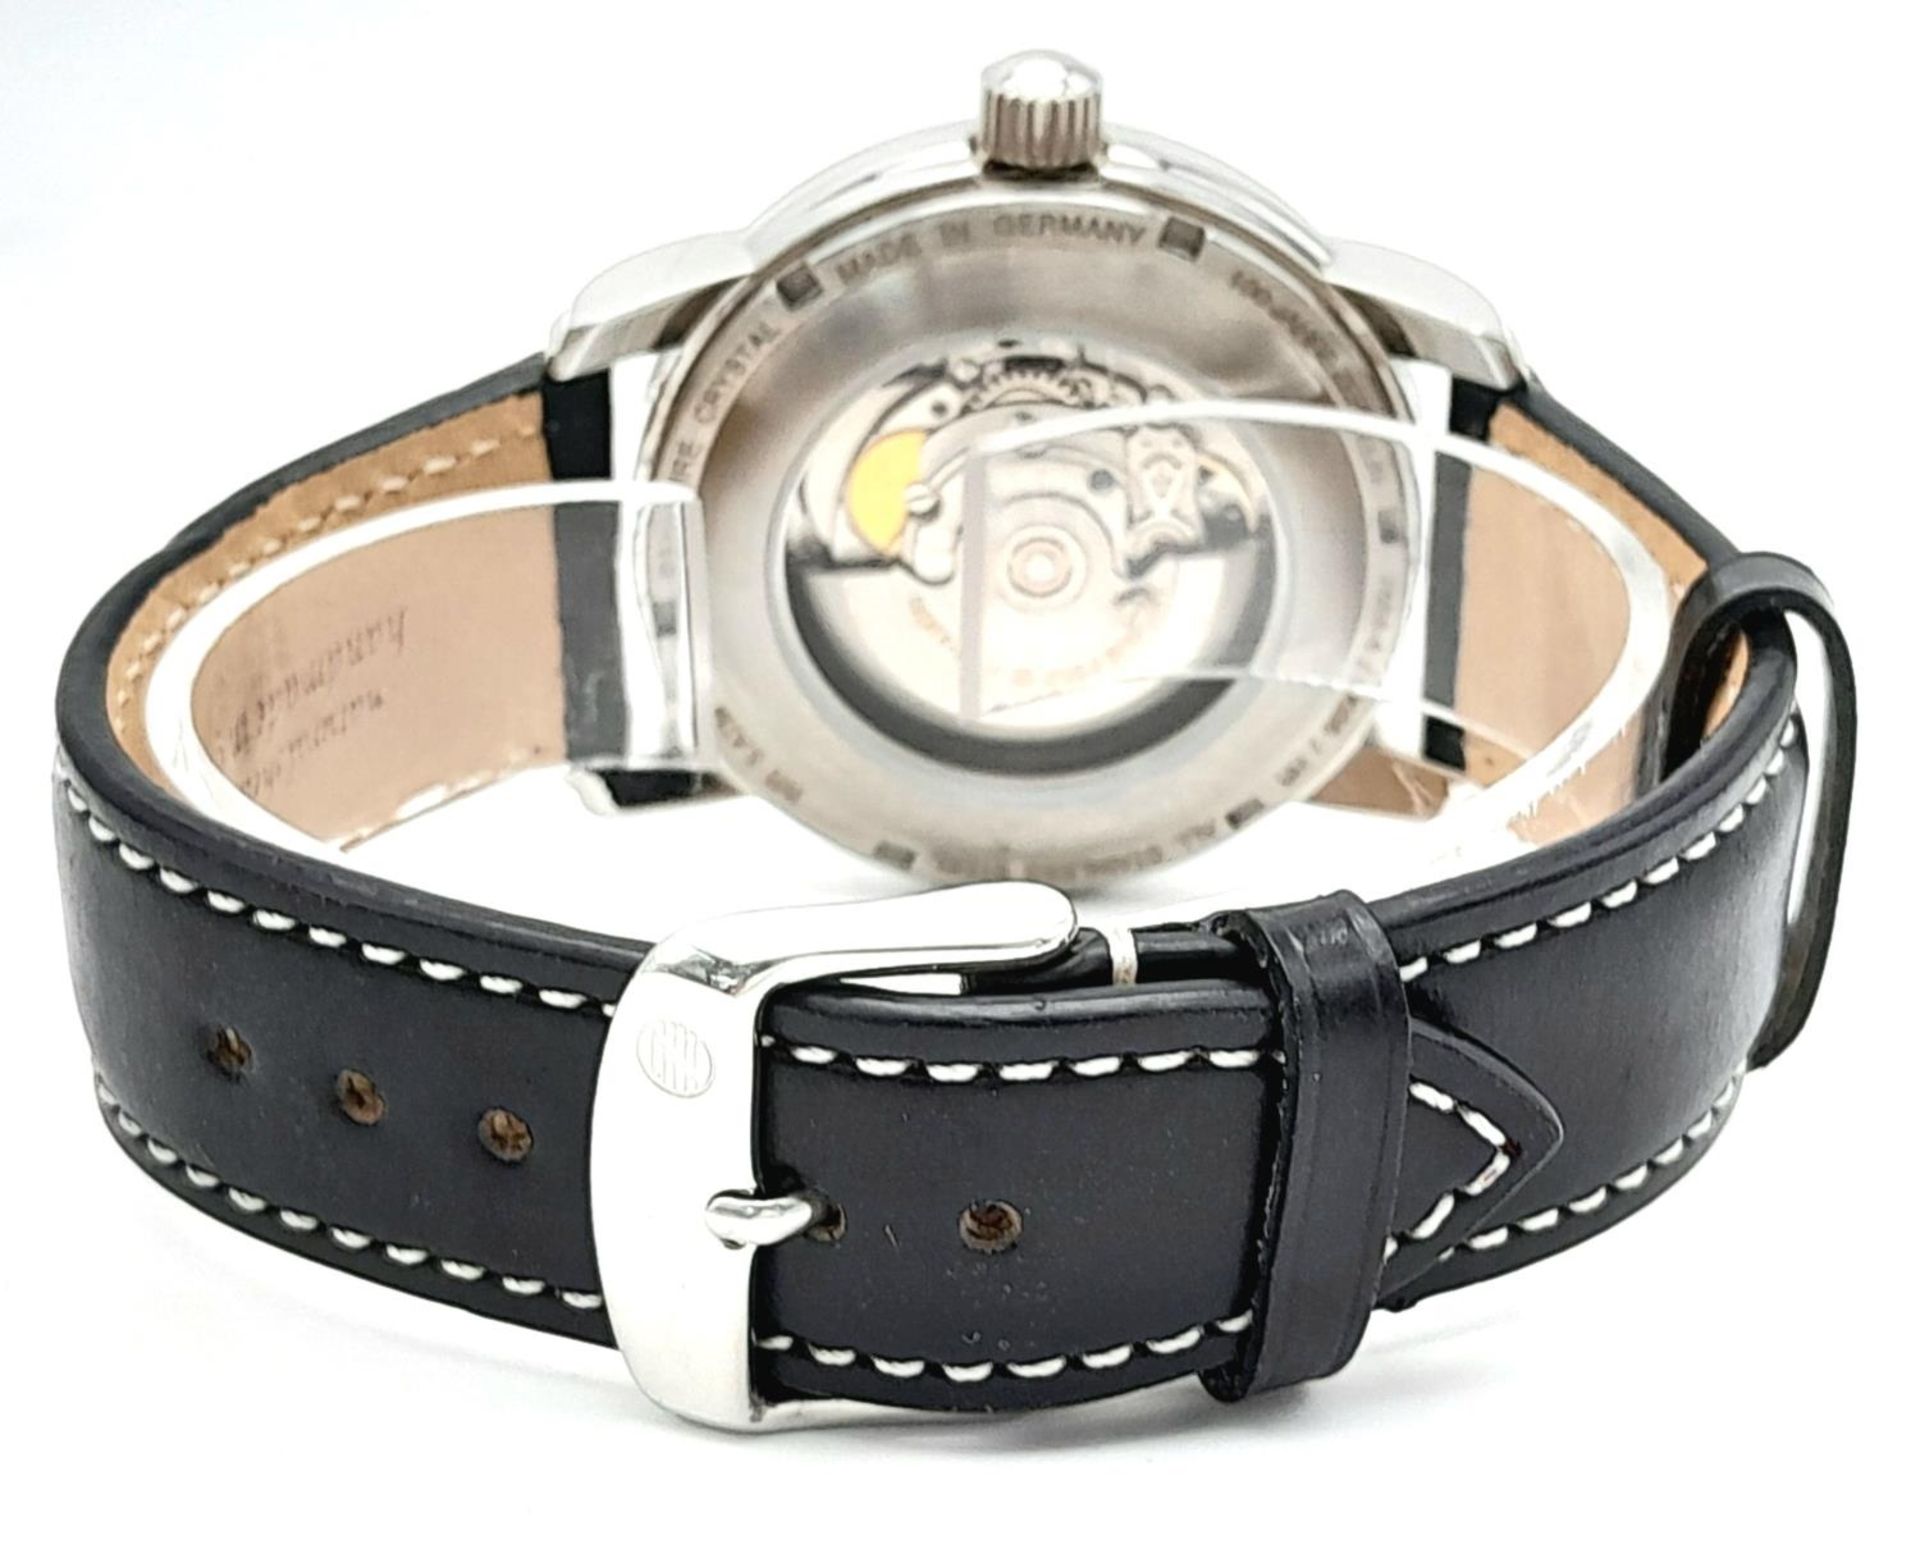 A Zeppelin Automatic Gents Watch. Black leather strap. Stainless steel case - 42mm. White dial - Image 4 of 6